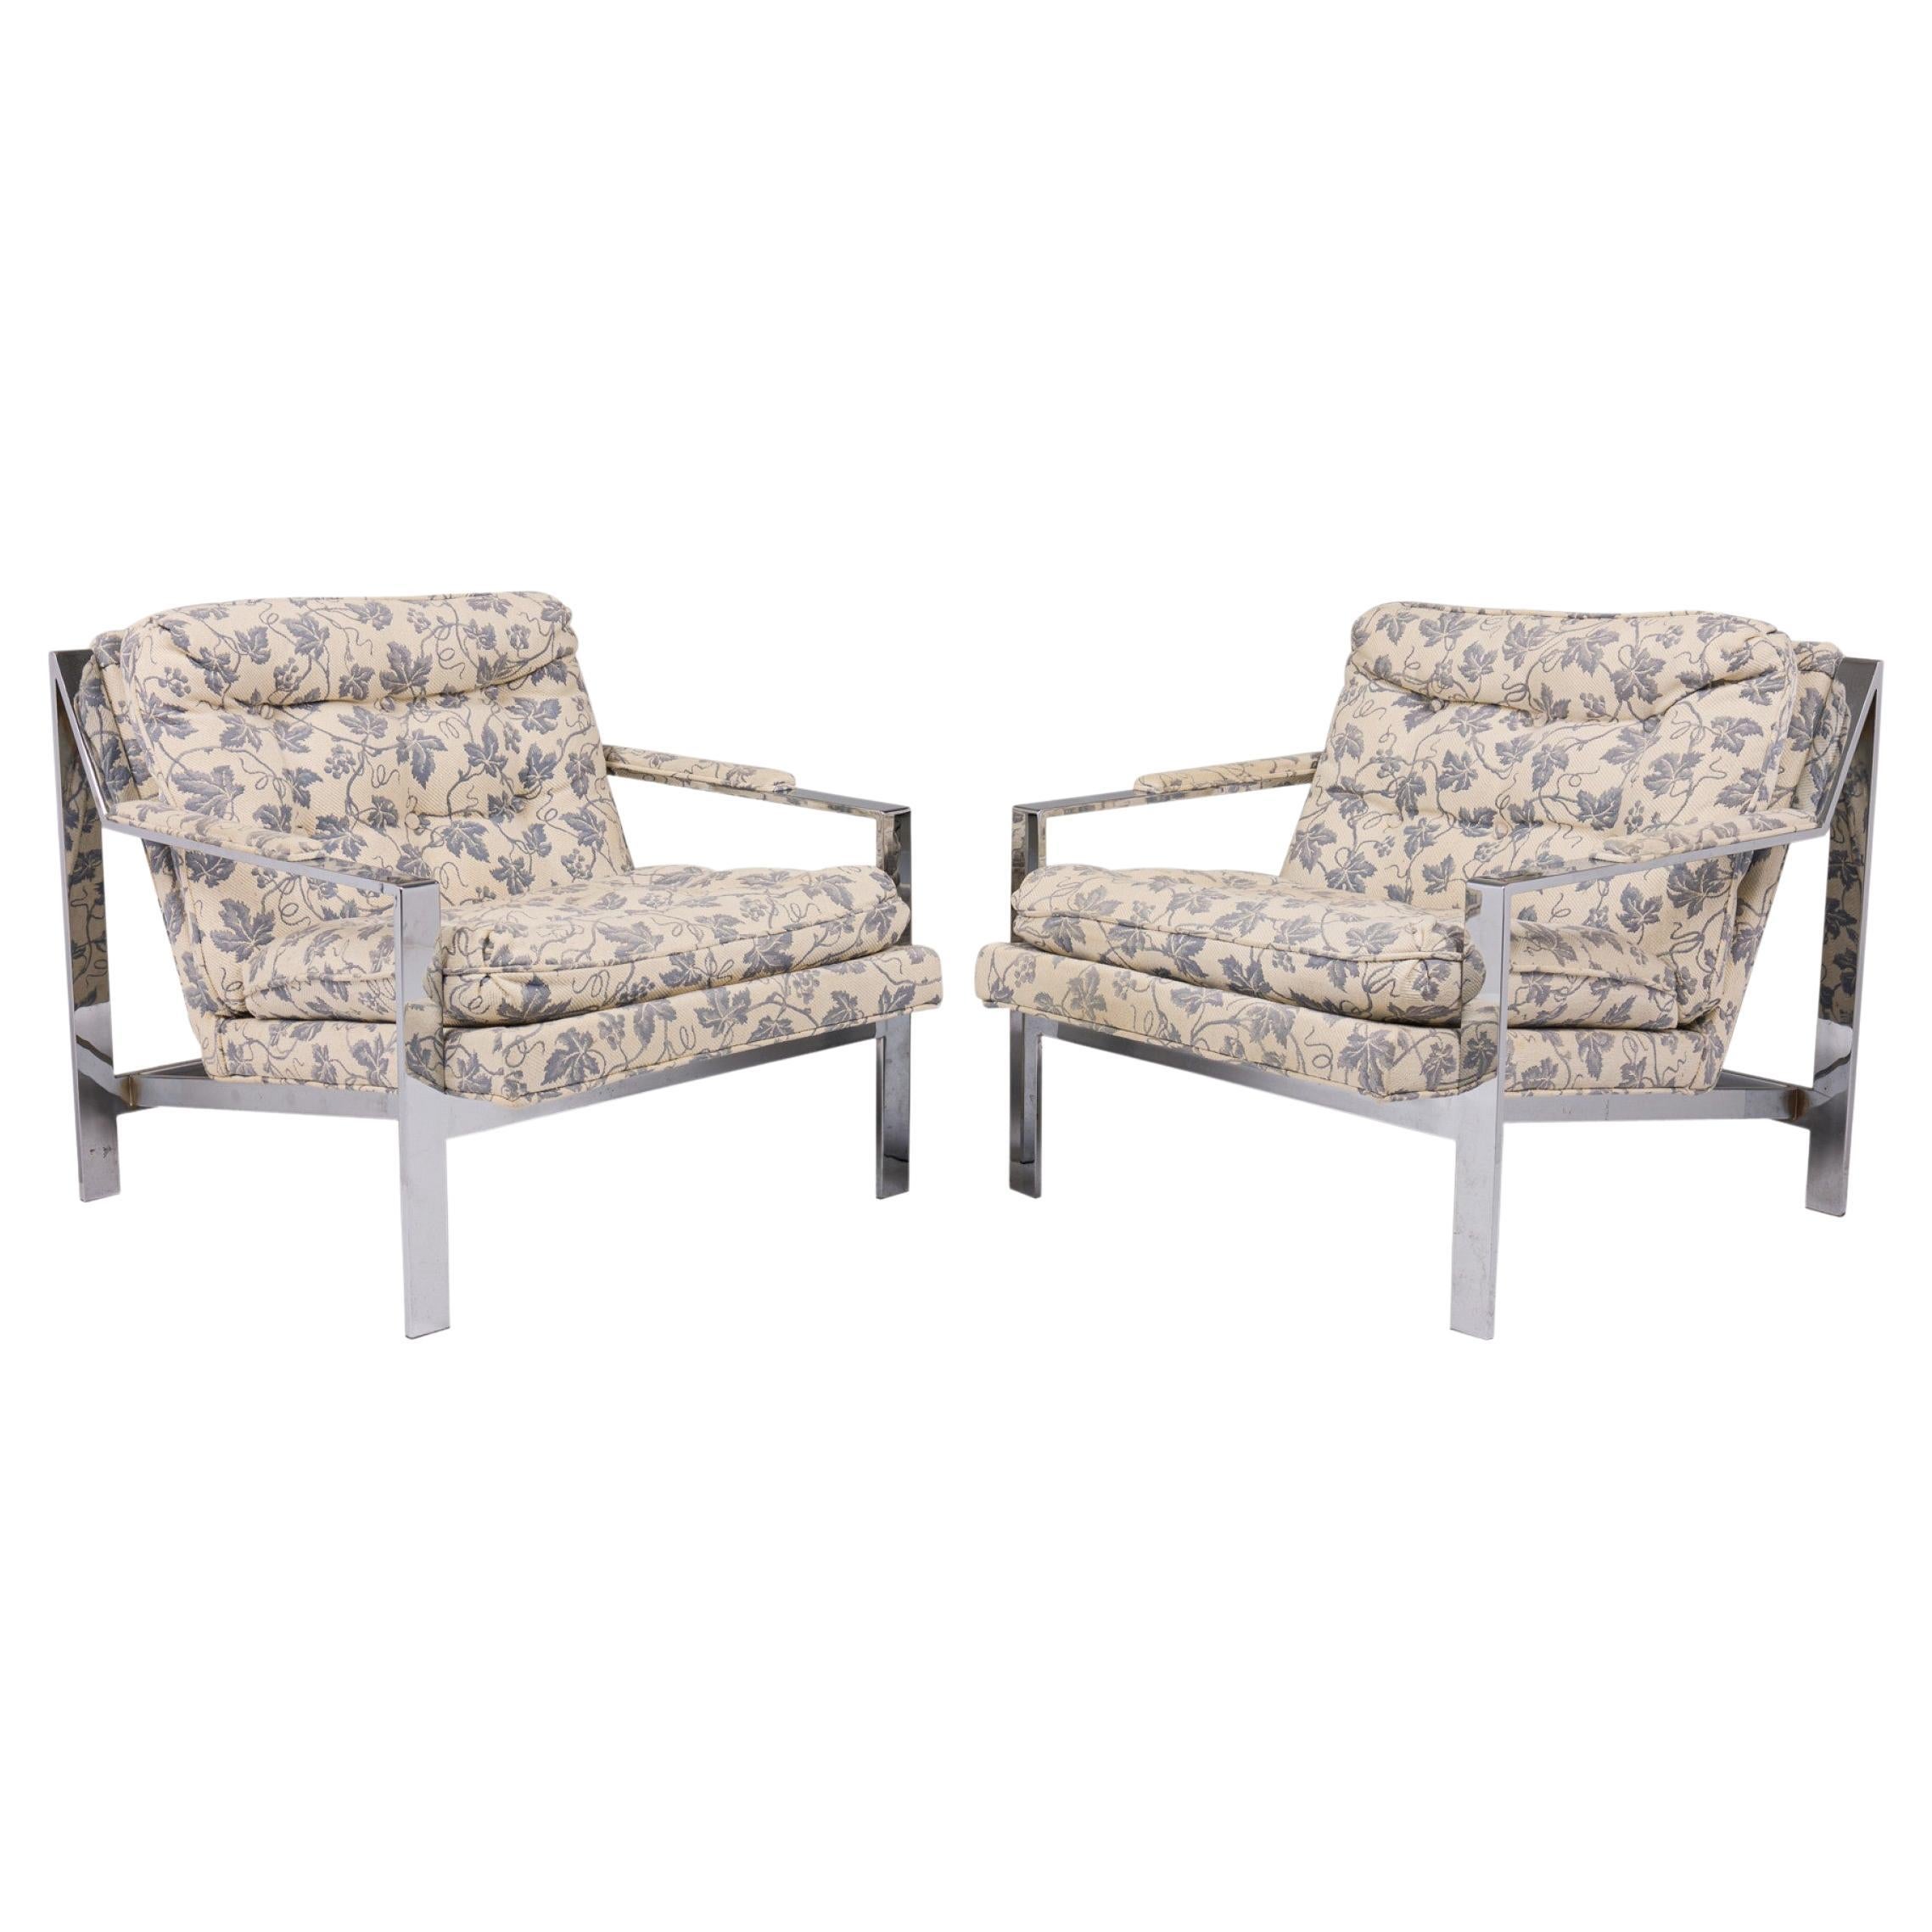 Pair of Milo Baughman for Thayer Coggin Chrome and Floral Armchairs  For Sale